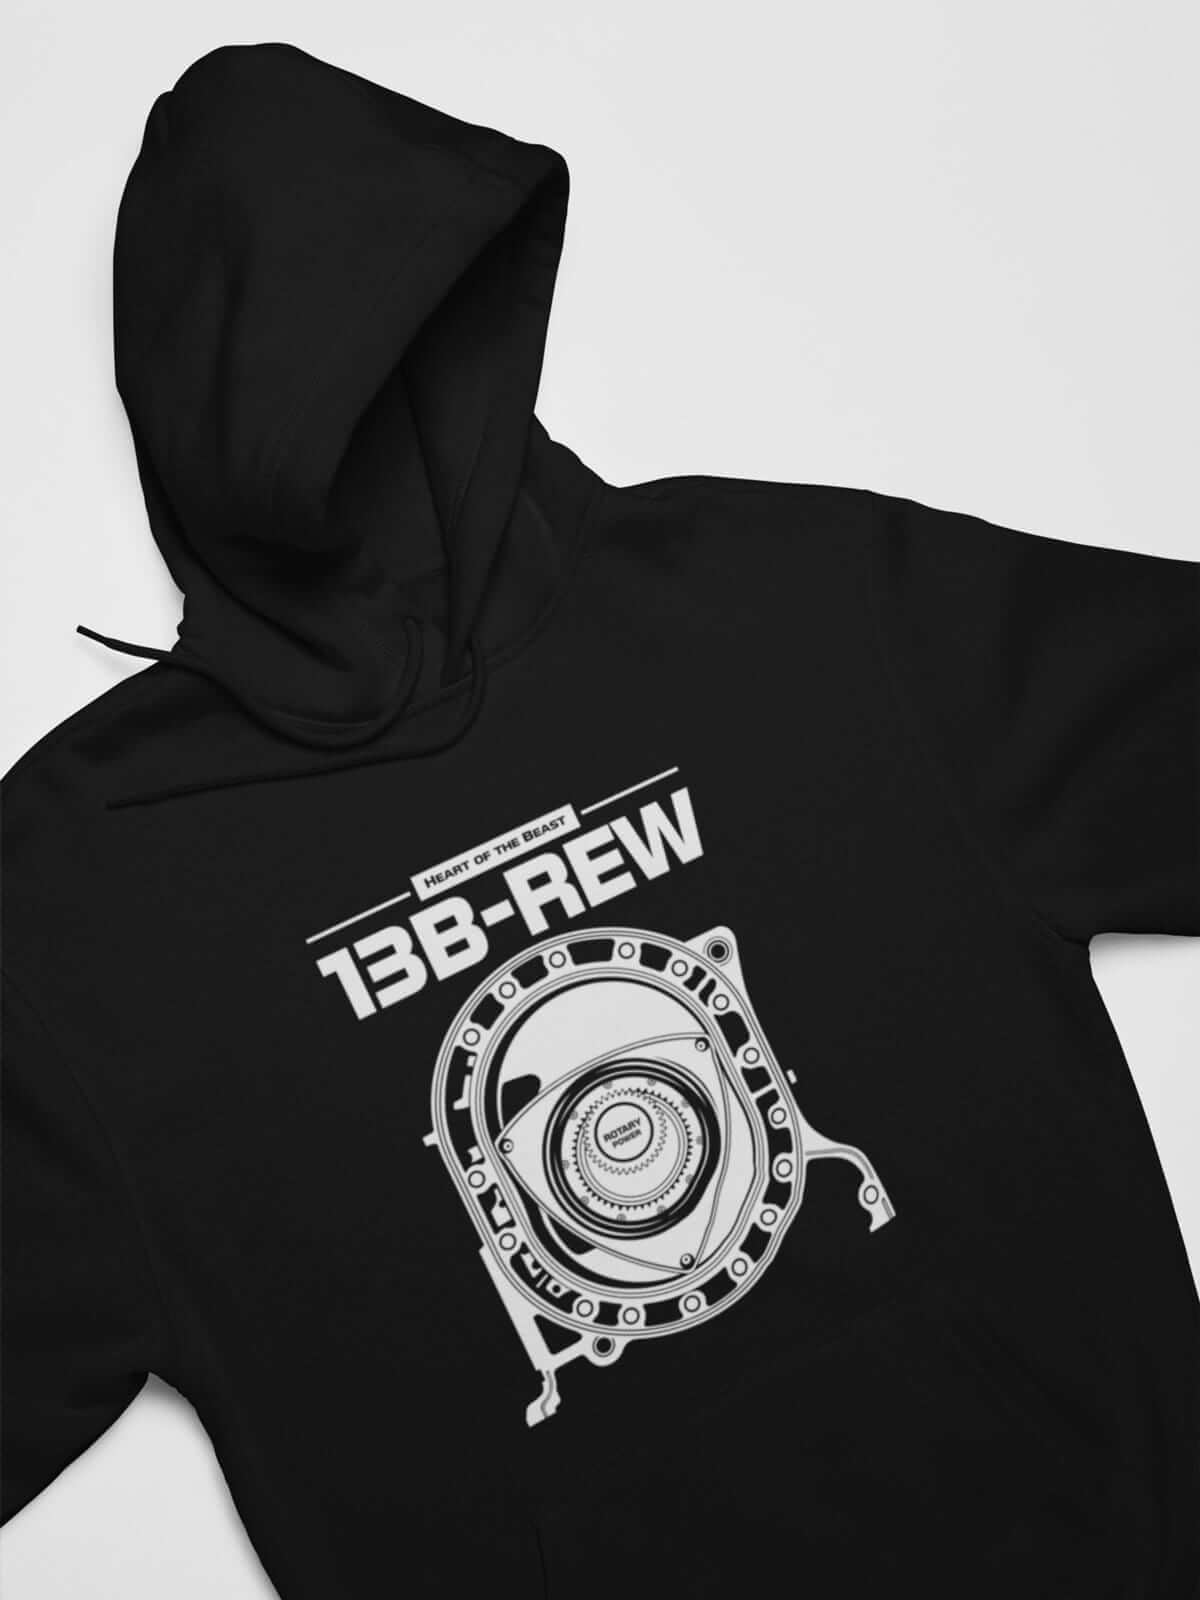 Legendary Japanese engine printed on black car hoodie designed for car lovers, car guys, car enthusiasts, JDM lovers and petrolheads